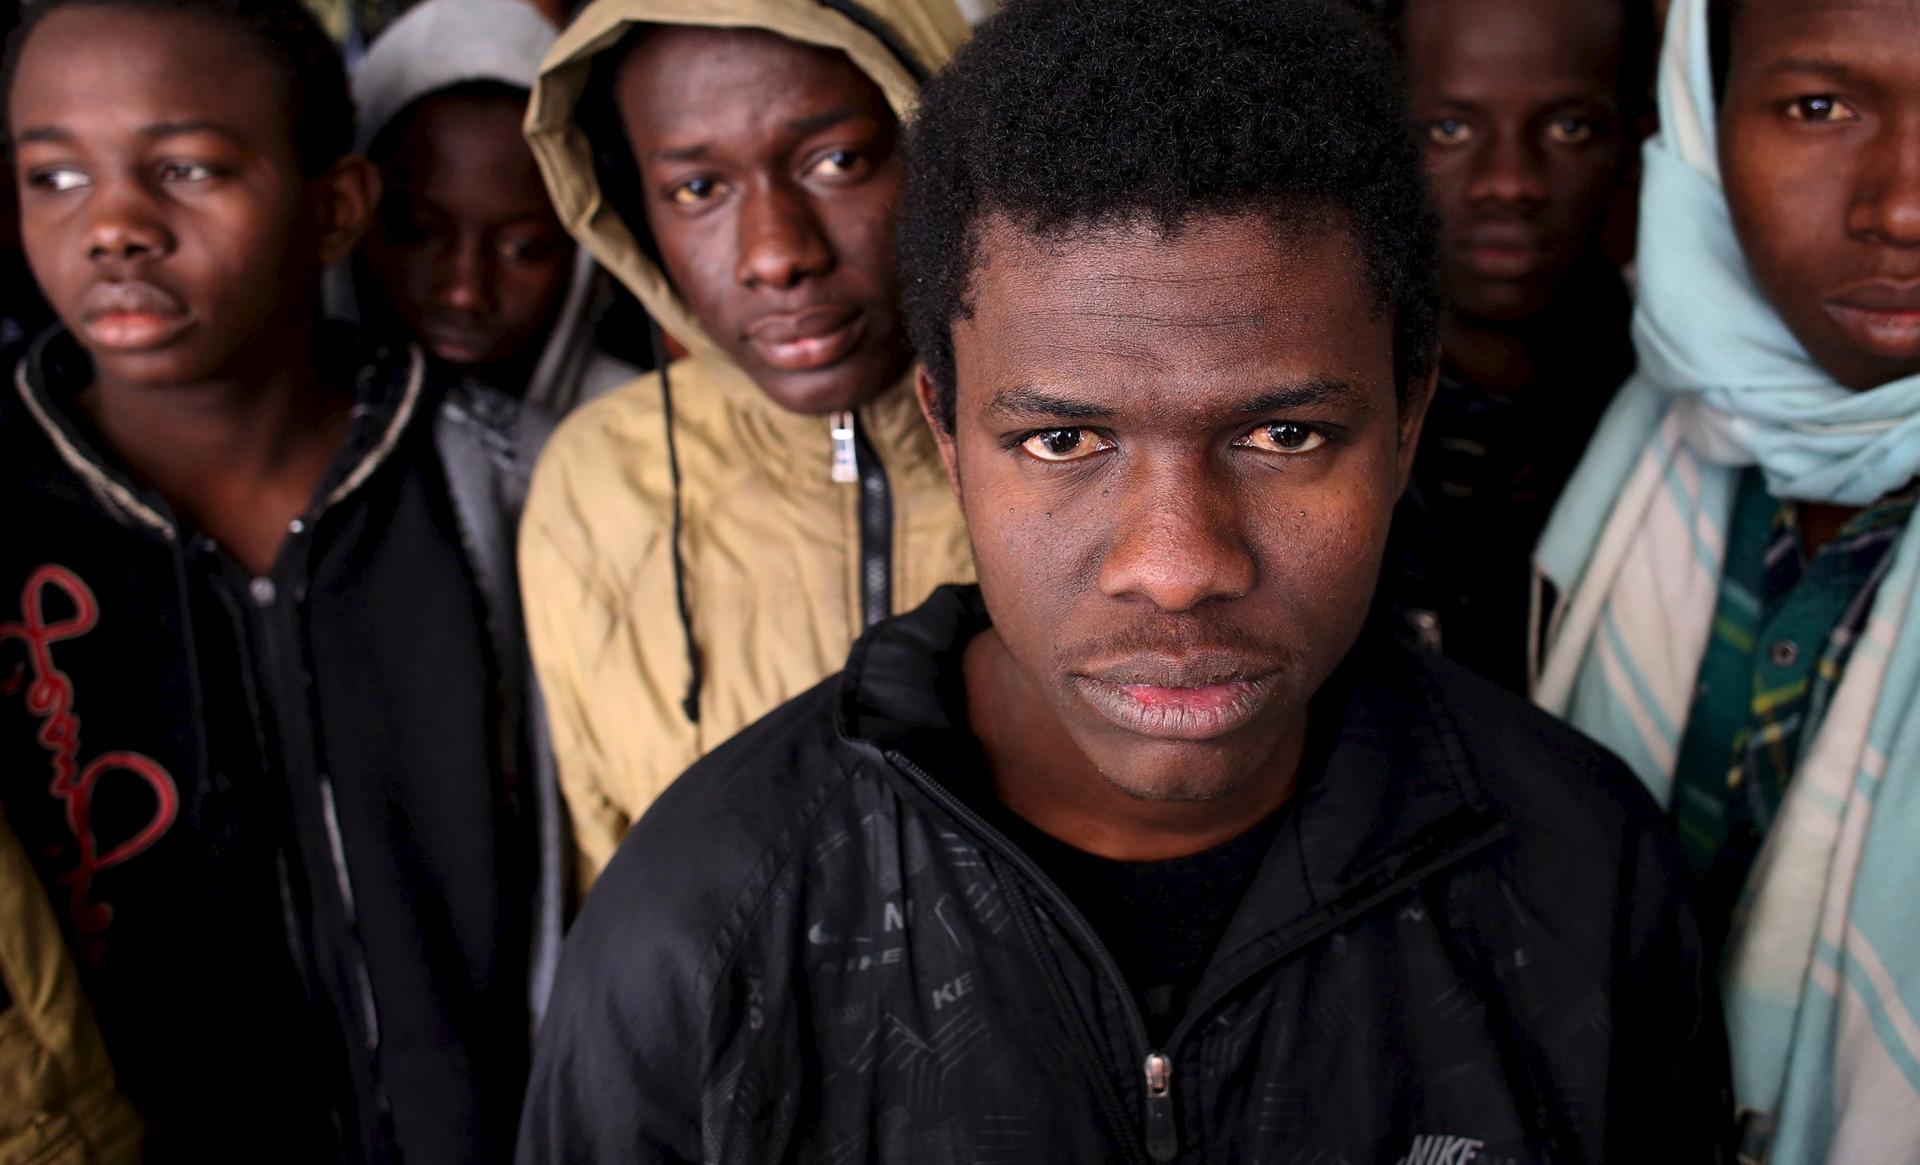 Illegal migrants stand in an immigration holding centre located on the outskirts of Misrata Libya, on March 11, 2015. Italy wants Egypt and Tunisia to play a role in rescuing stricken migrant vessels in the Mediterranean.